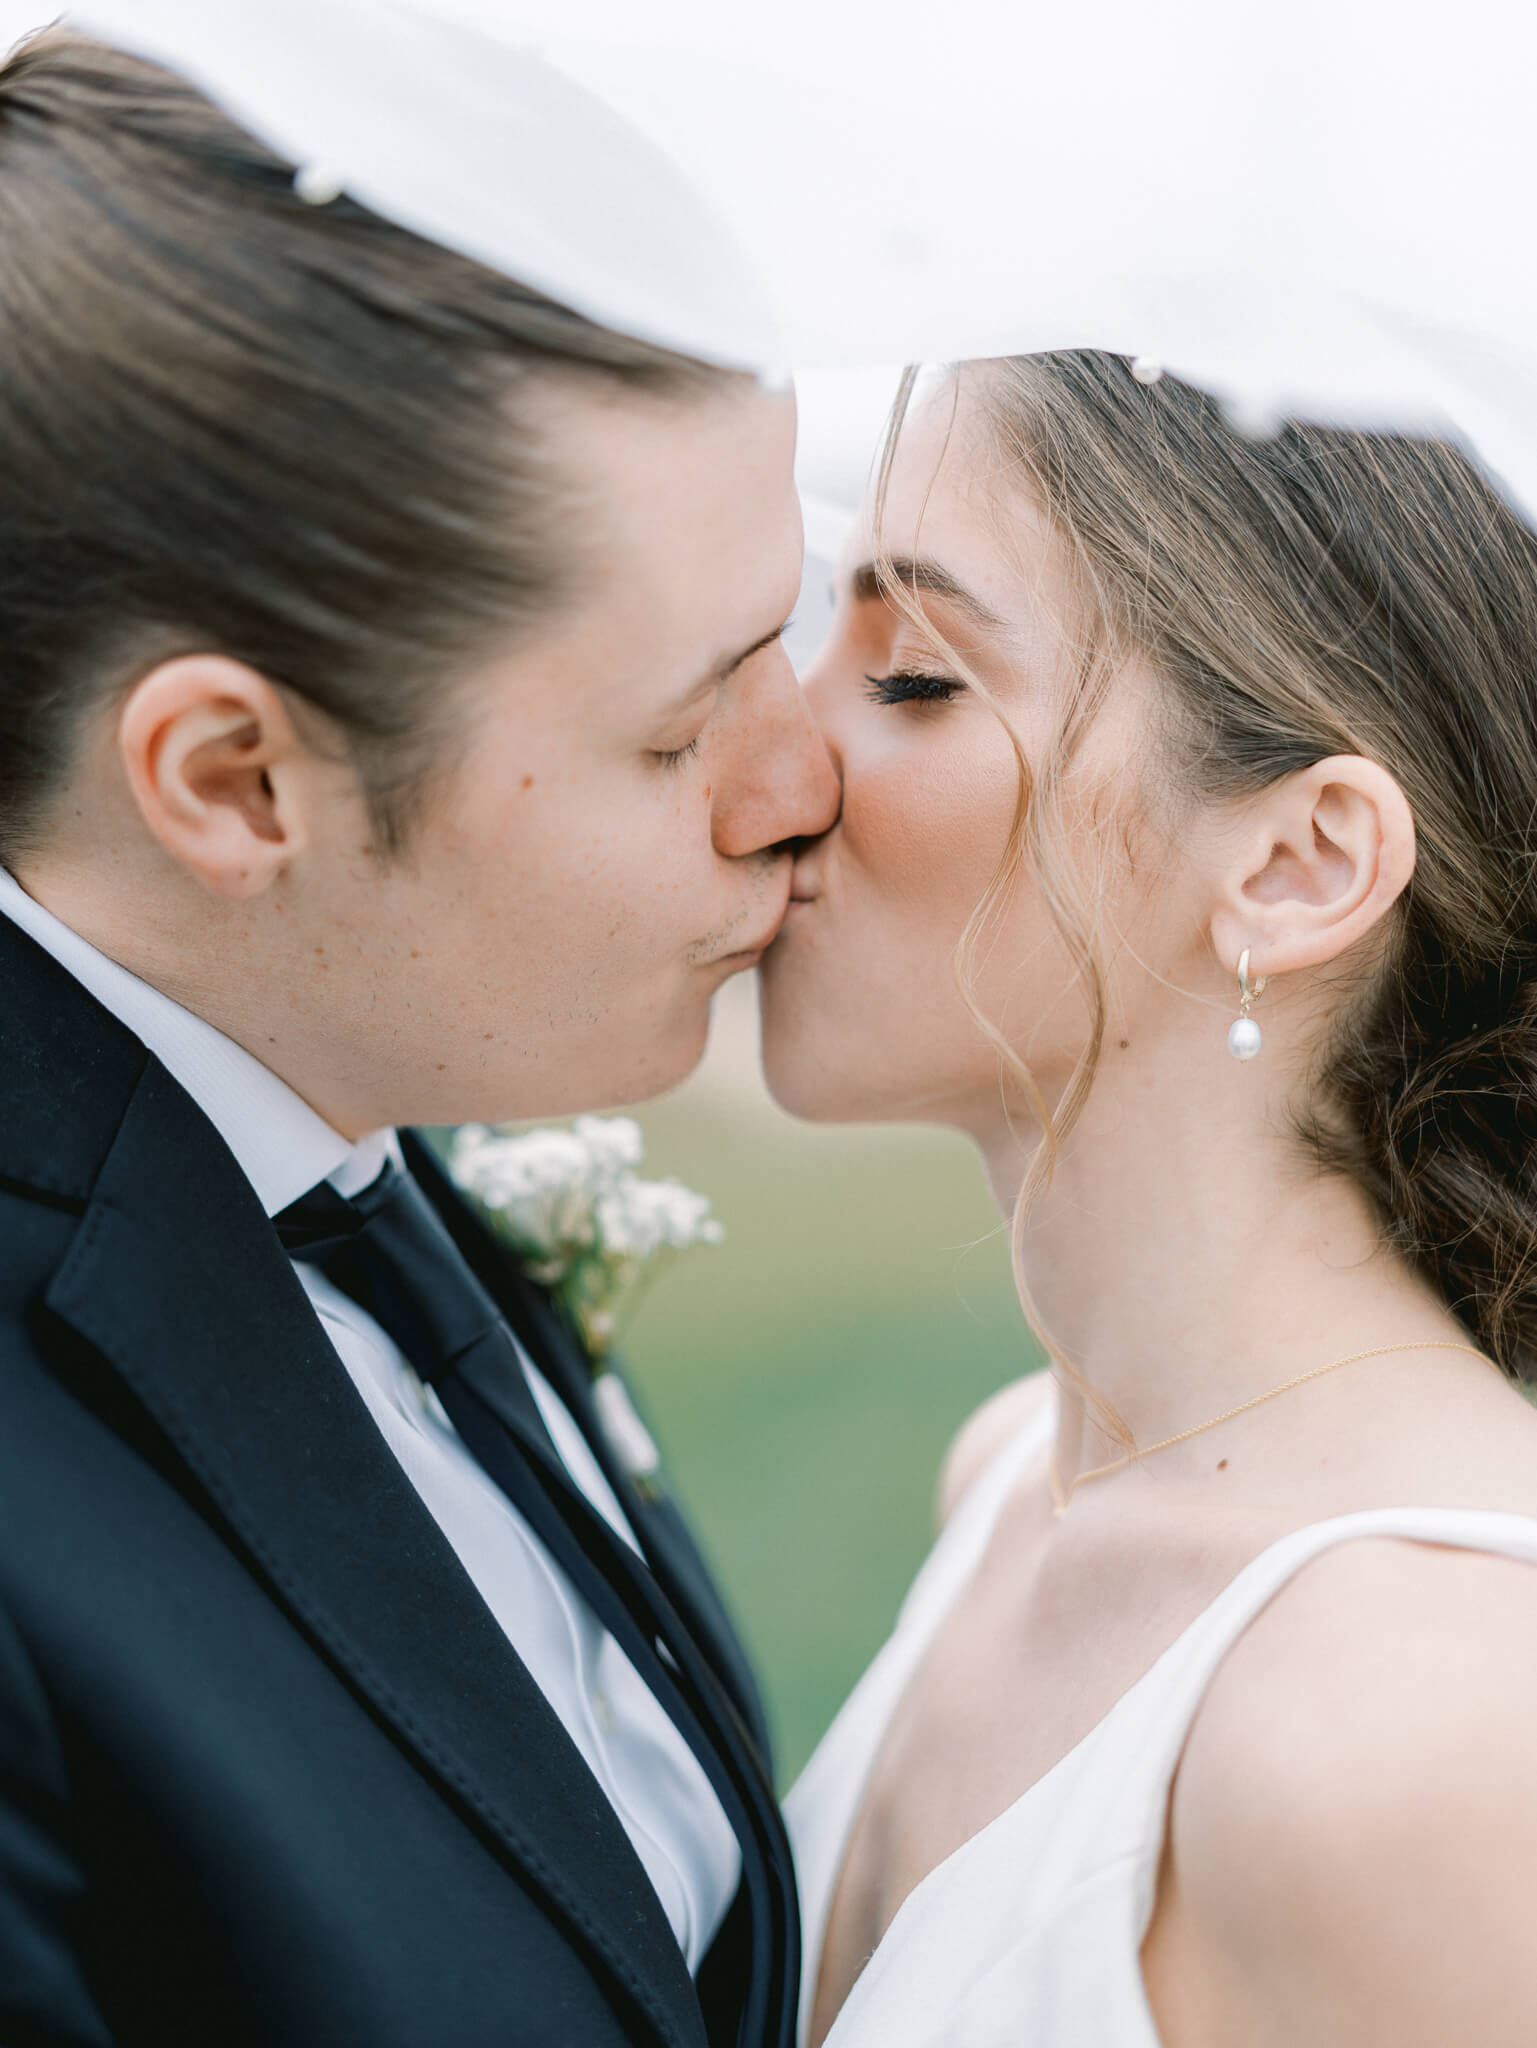 Close-up of a bride and groom kissing under a veil.